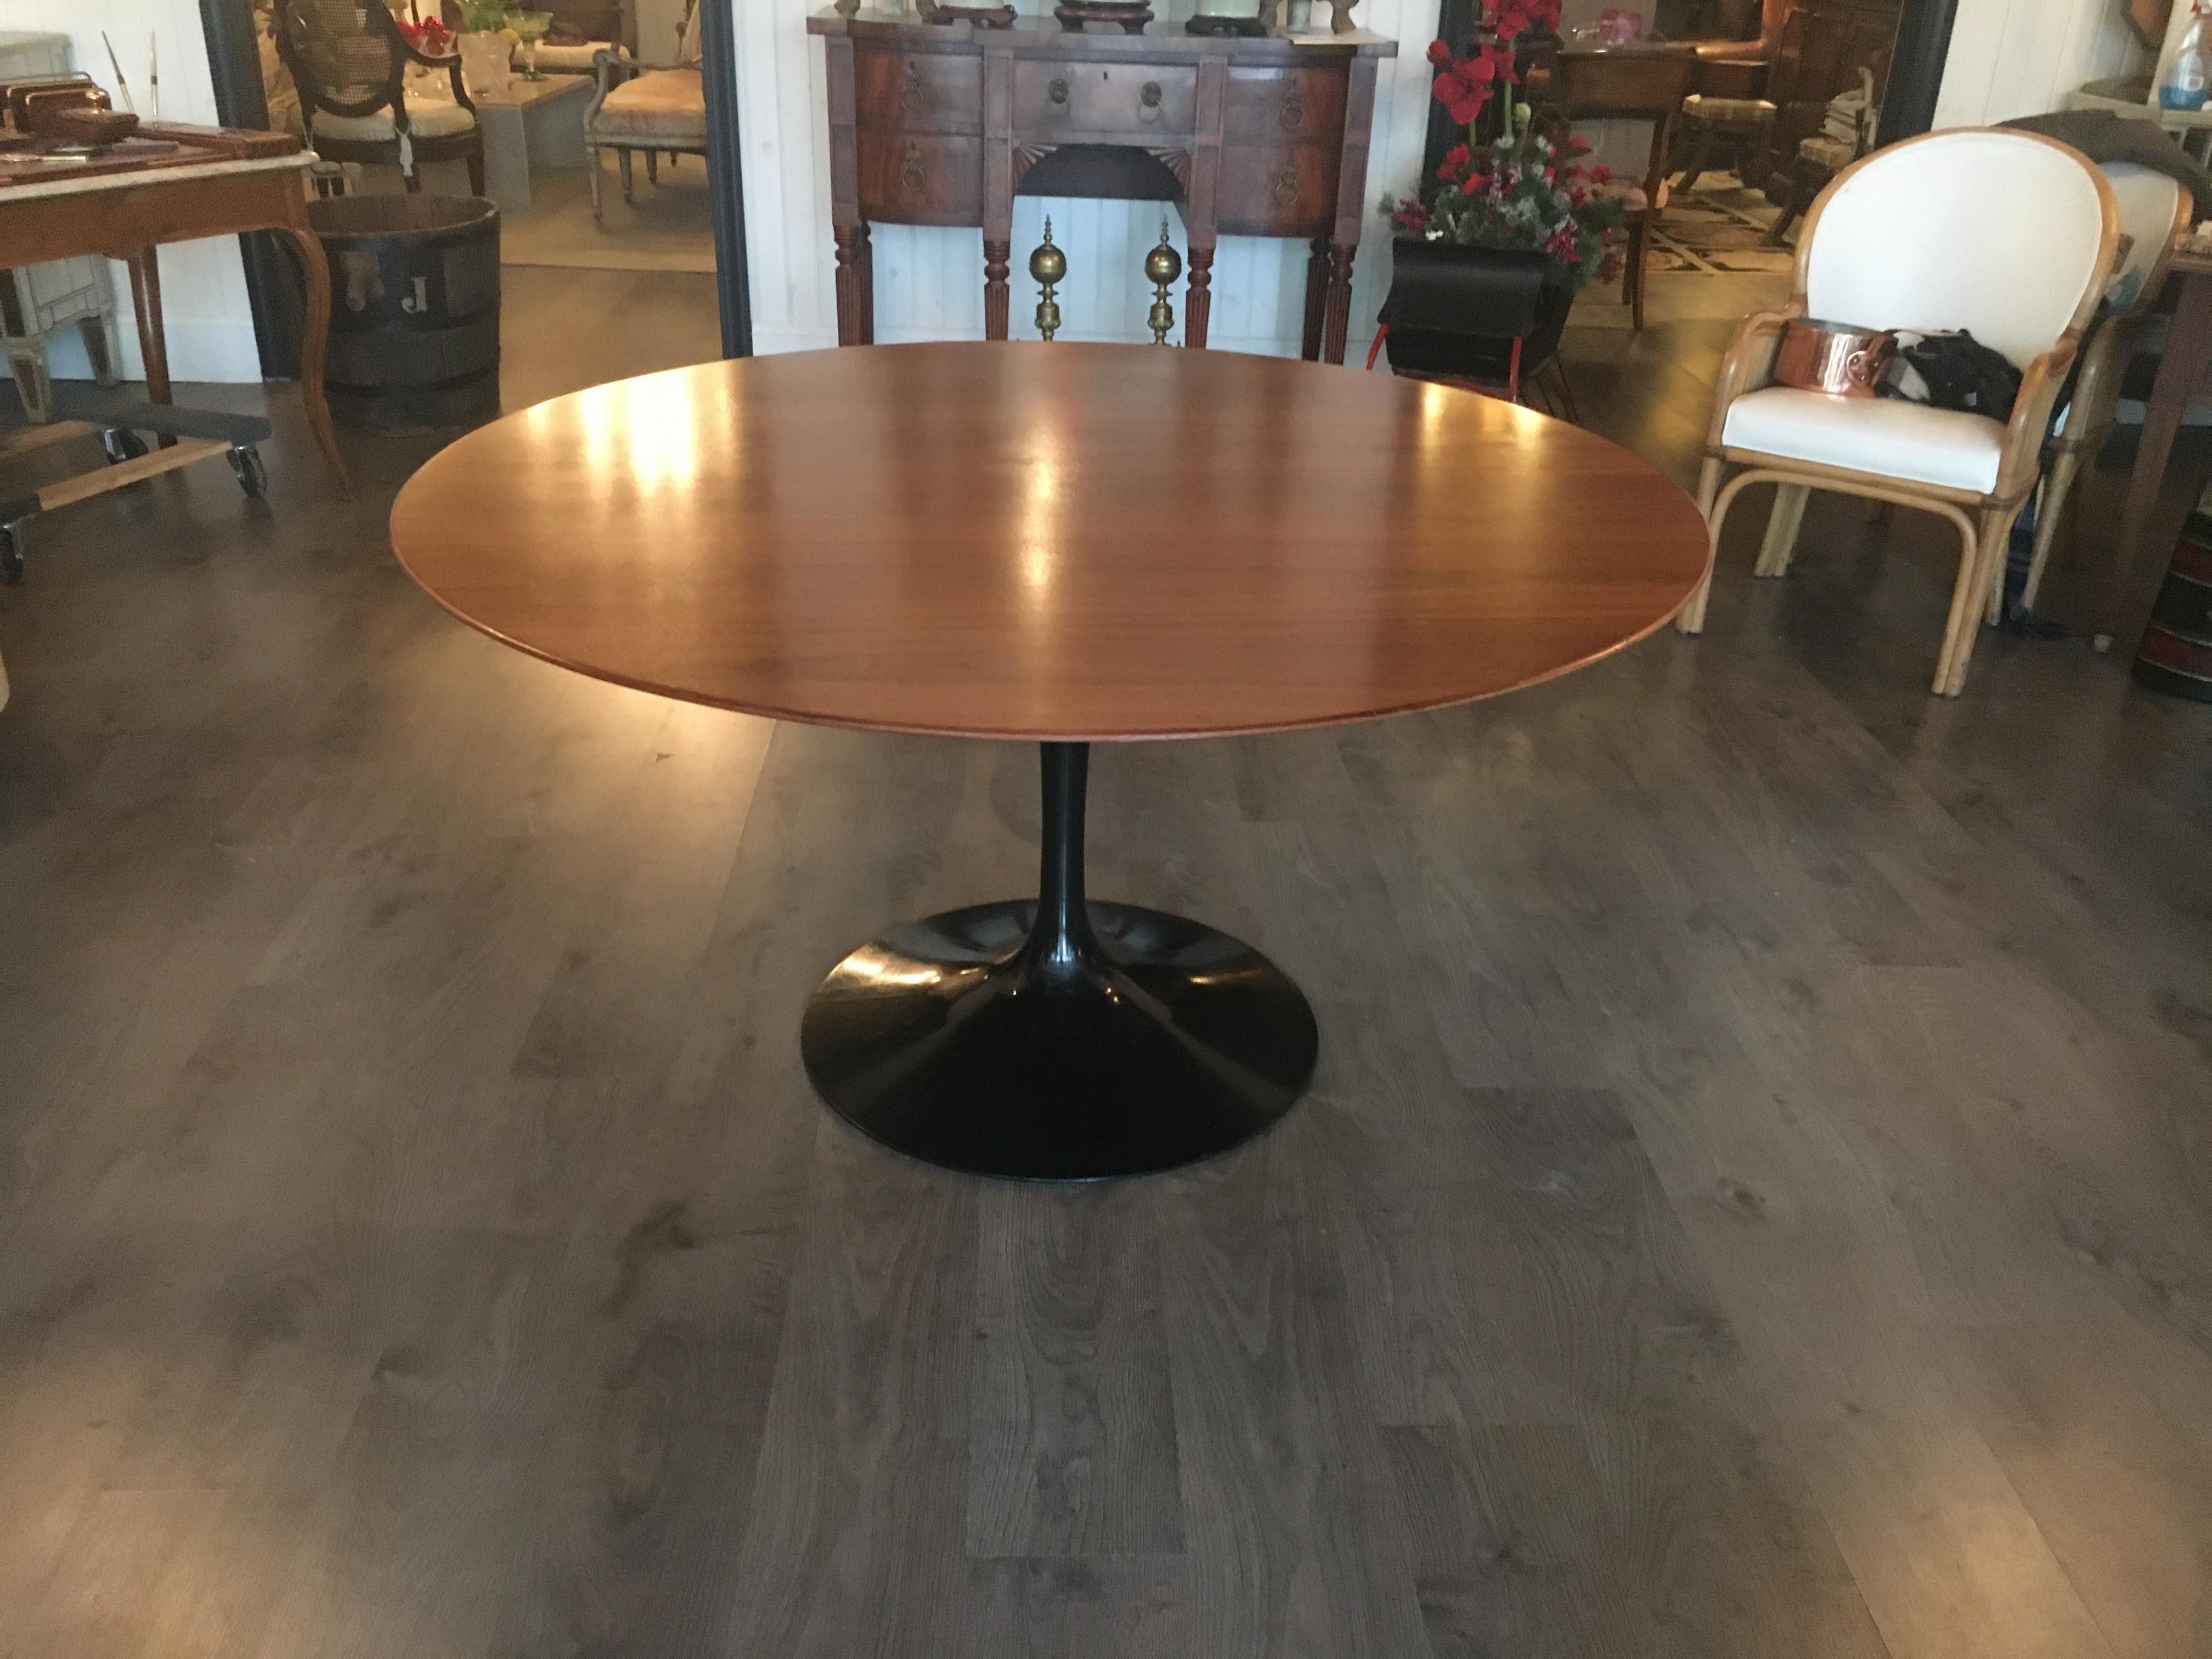 An Eero Saarinen for Knoll tulip table. Rare black base with teak top. Signed Knoll on base. Great floating effect with black base wood top combination.